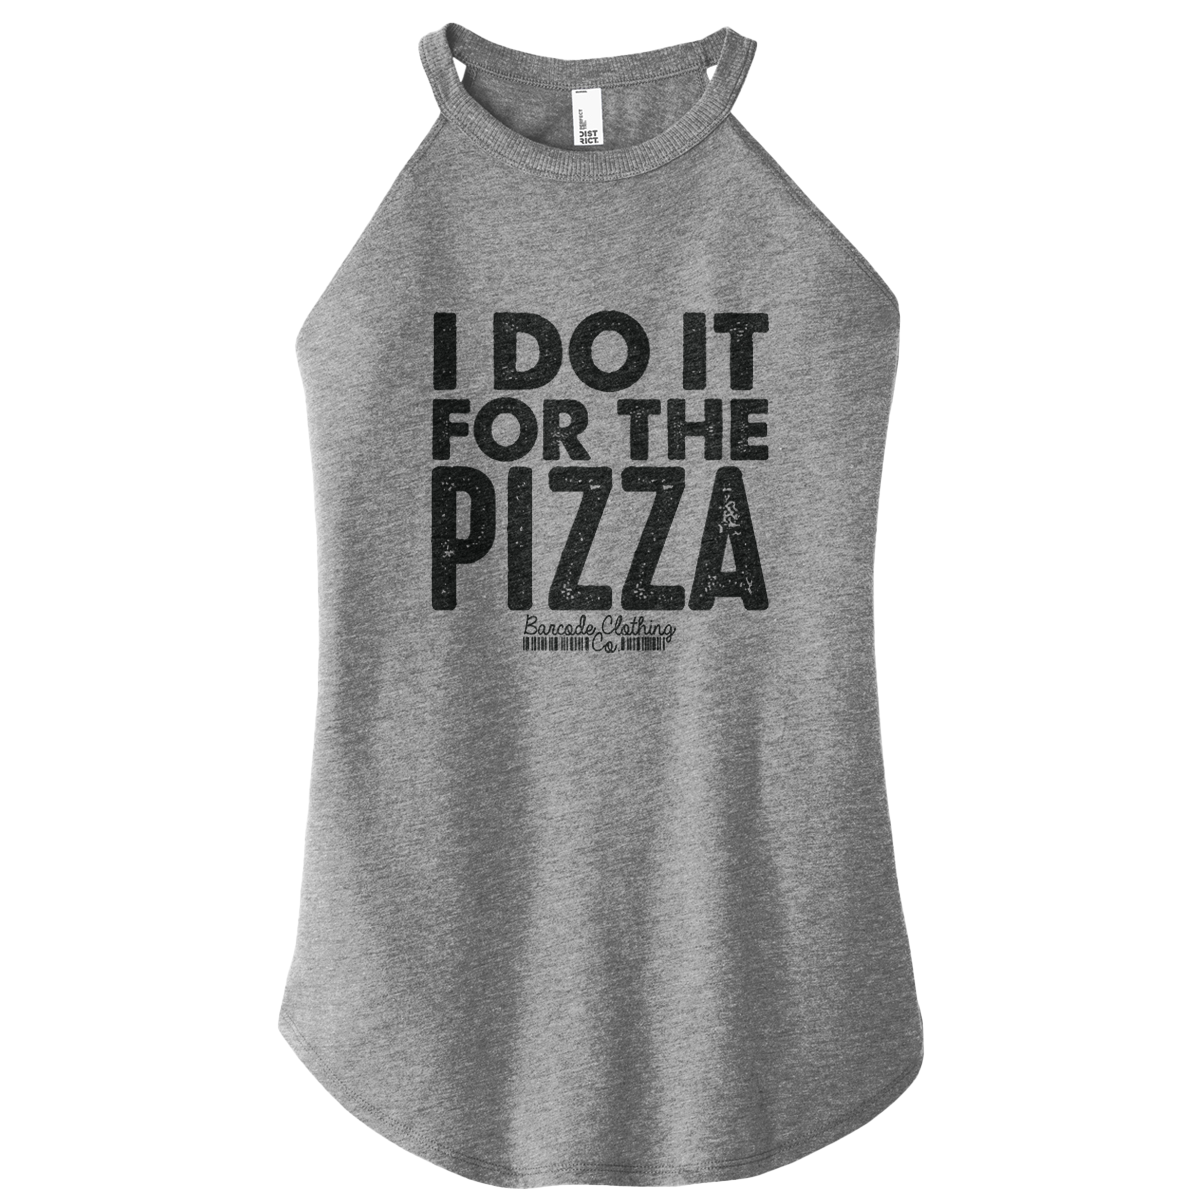 For the Pizza Rocker Tank